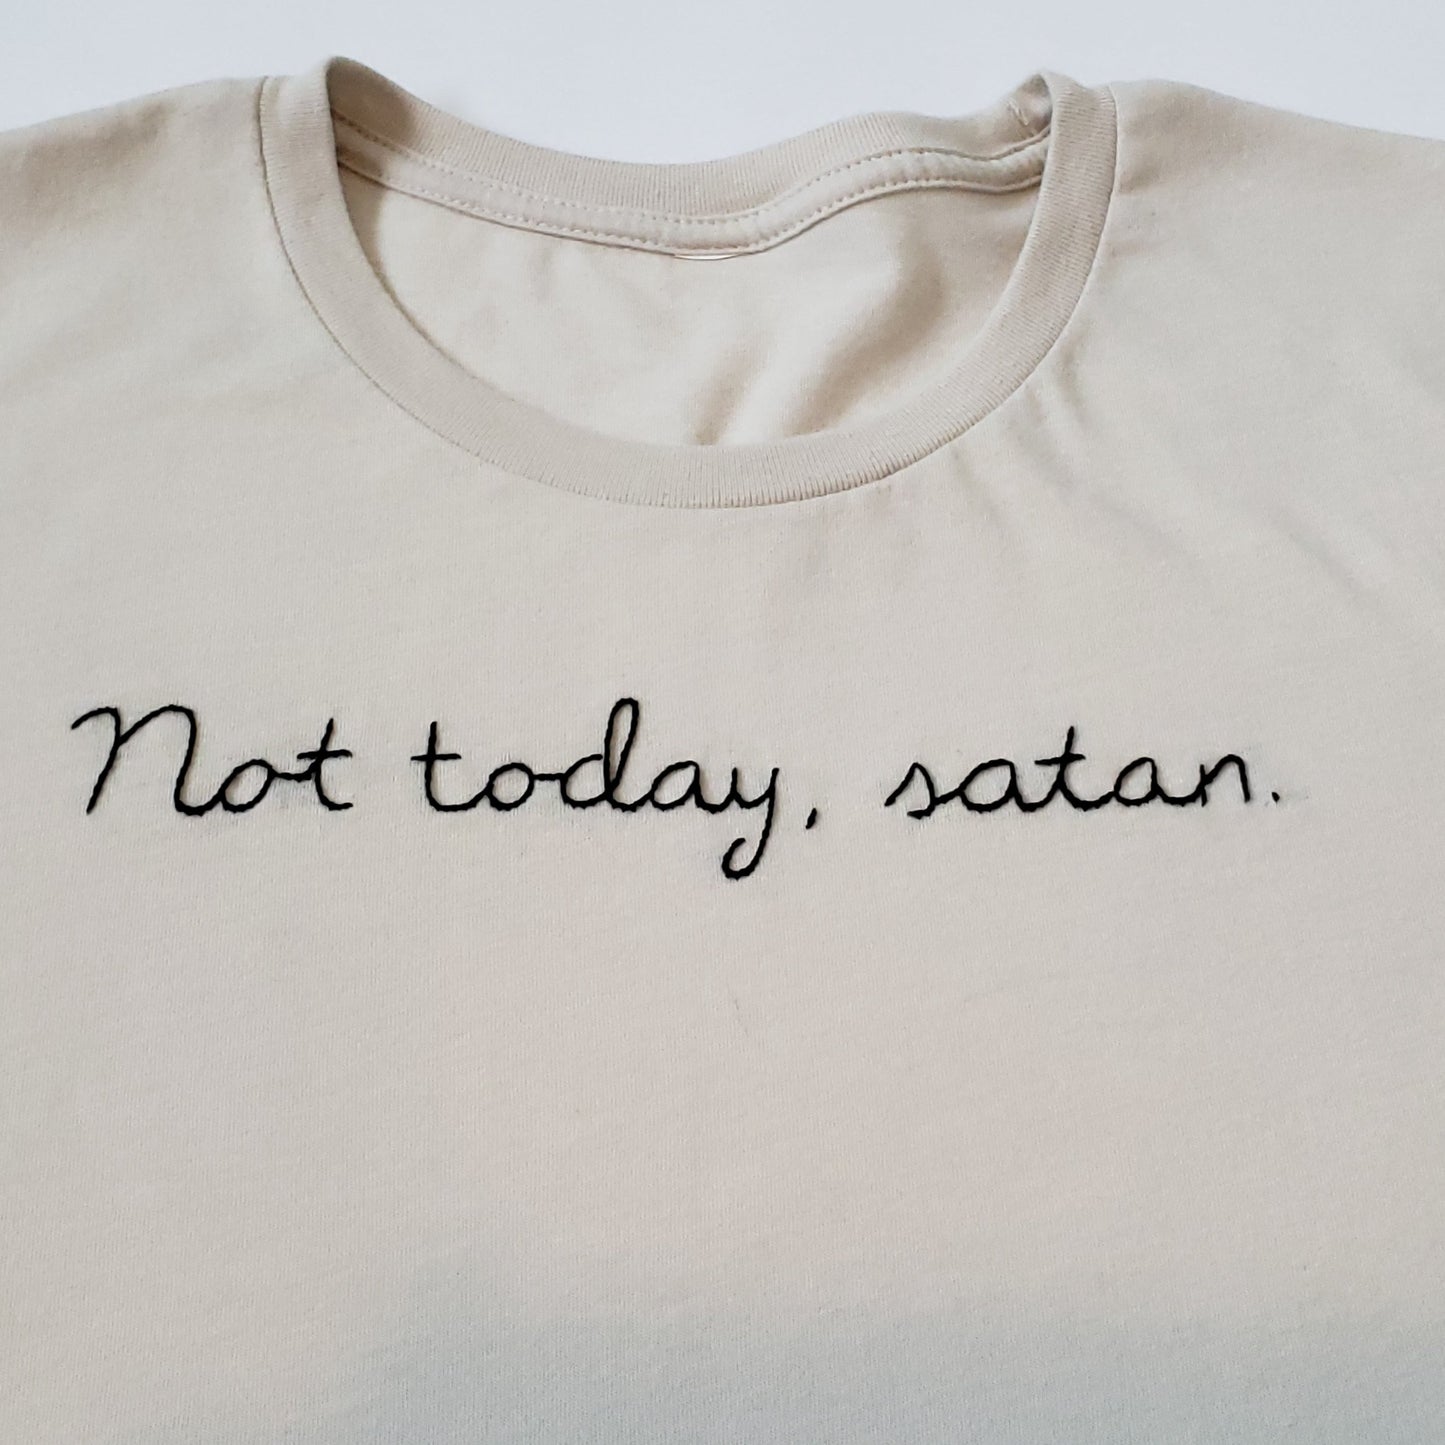 A close up of the stitching on a sandstone tee, laid flat on a white background. "Not today, satan." is hand stitched on the tee in black thread in cursive. The artist used a vine stitch.